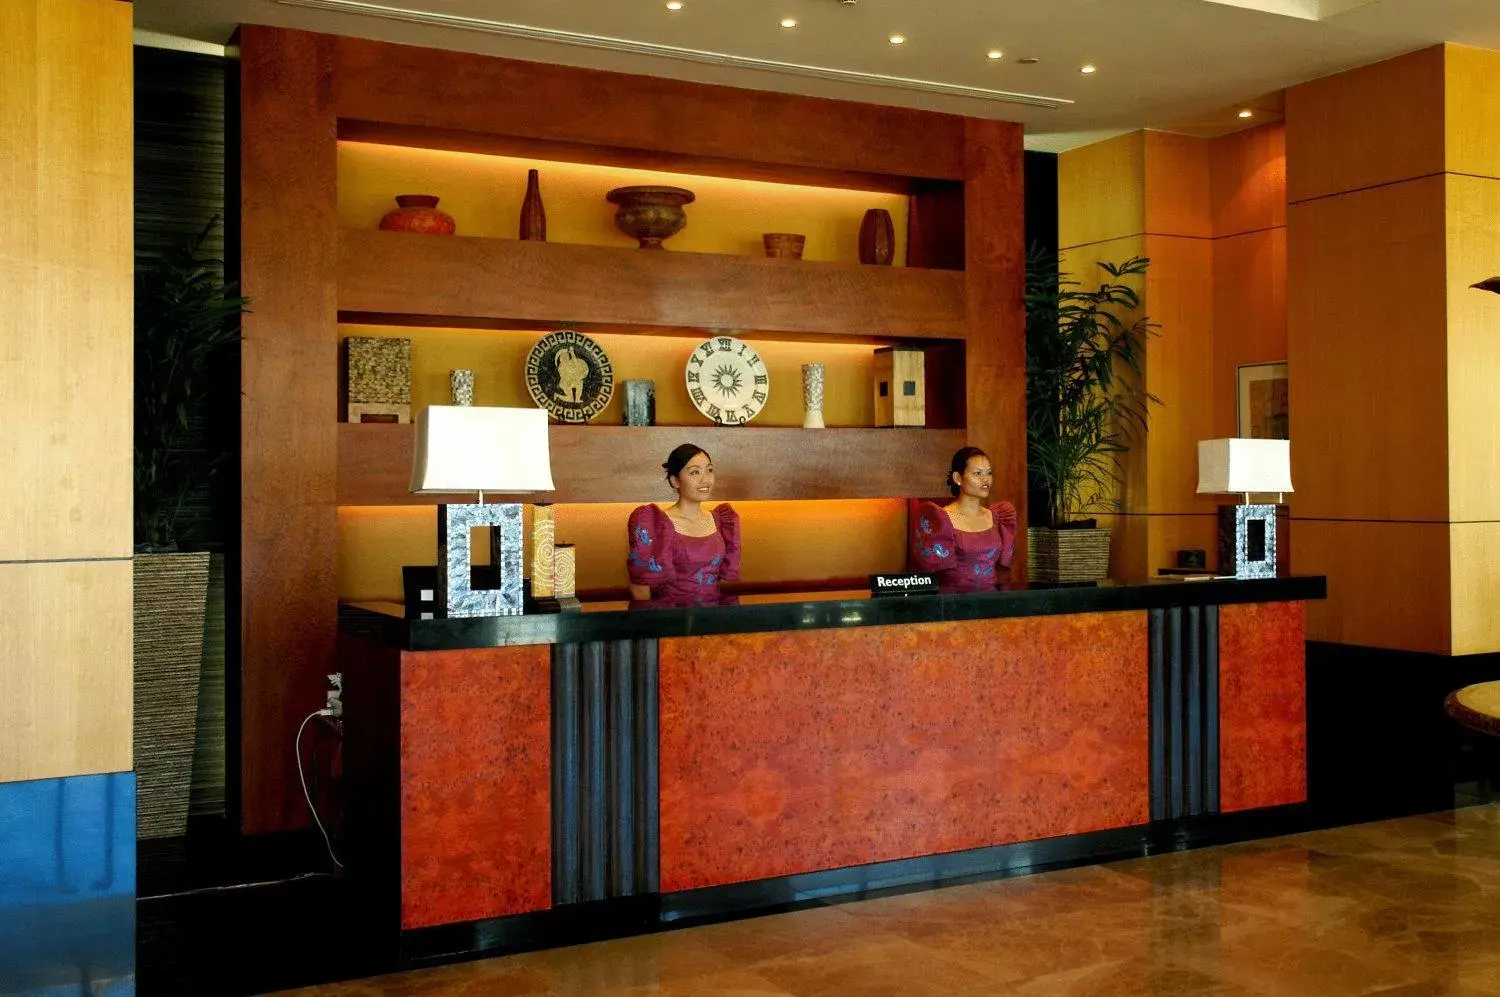 Lobby or reception, Lobby/Reception in Sotogrande Hotel and Resort